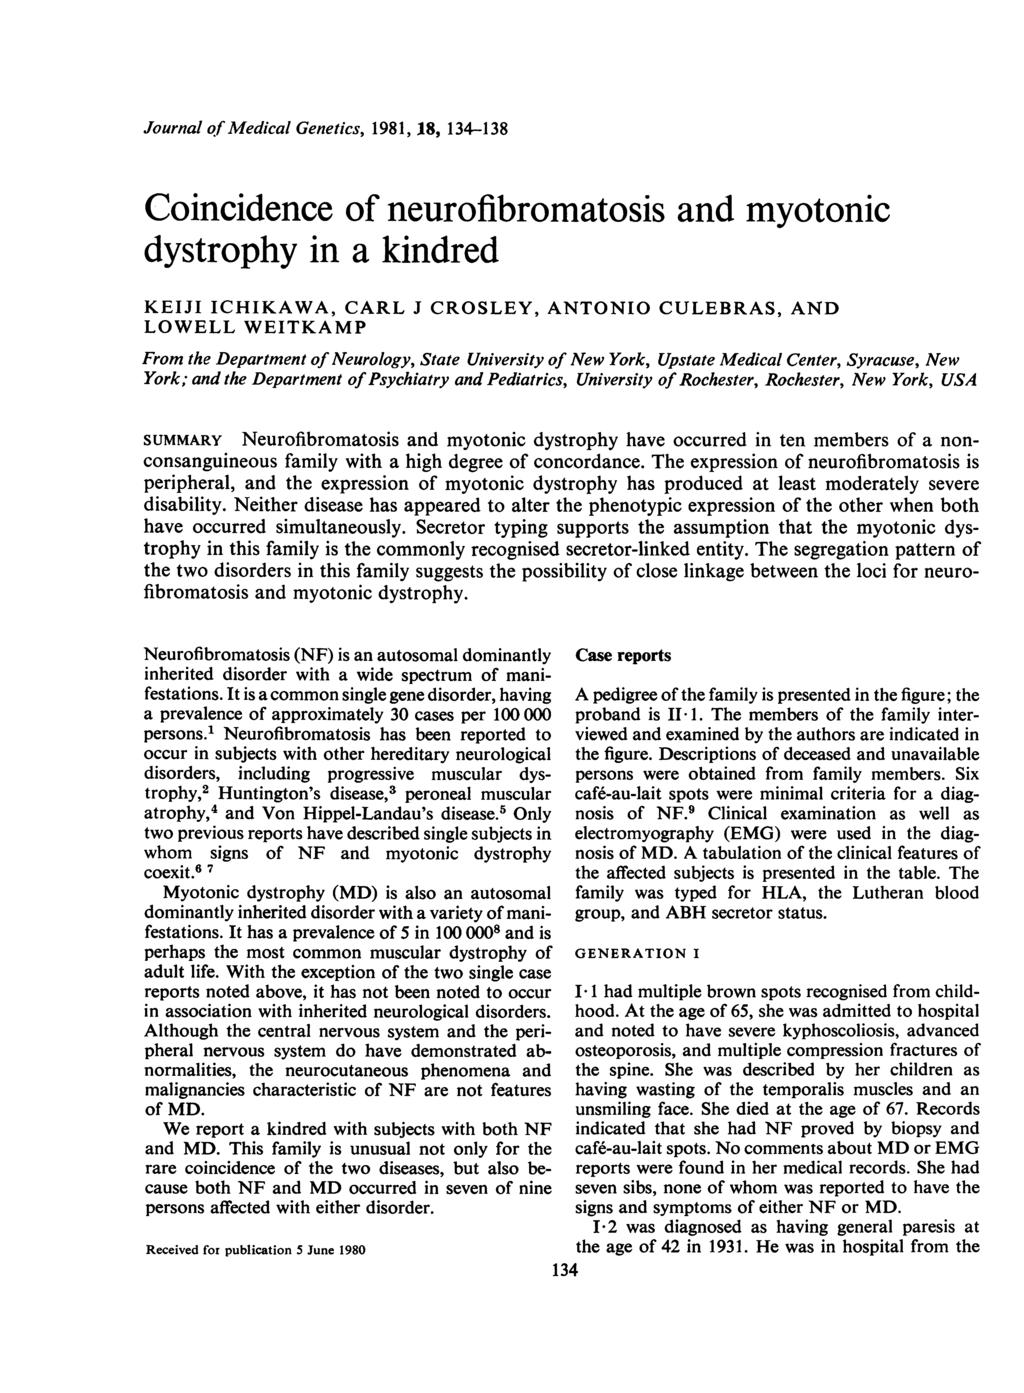 Journal of Medical Genetics, 1981, 18, 134-138 Coincidence of neurofibromatosis and myotonic dystrophy in a kindred KEIJI ICHIKAWA, CARL J CROSLEY, ANTONIO CULEBRAS, AND LOWELL WEITKAMP From the